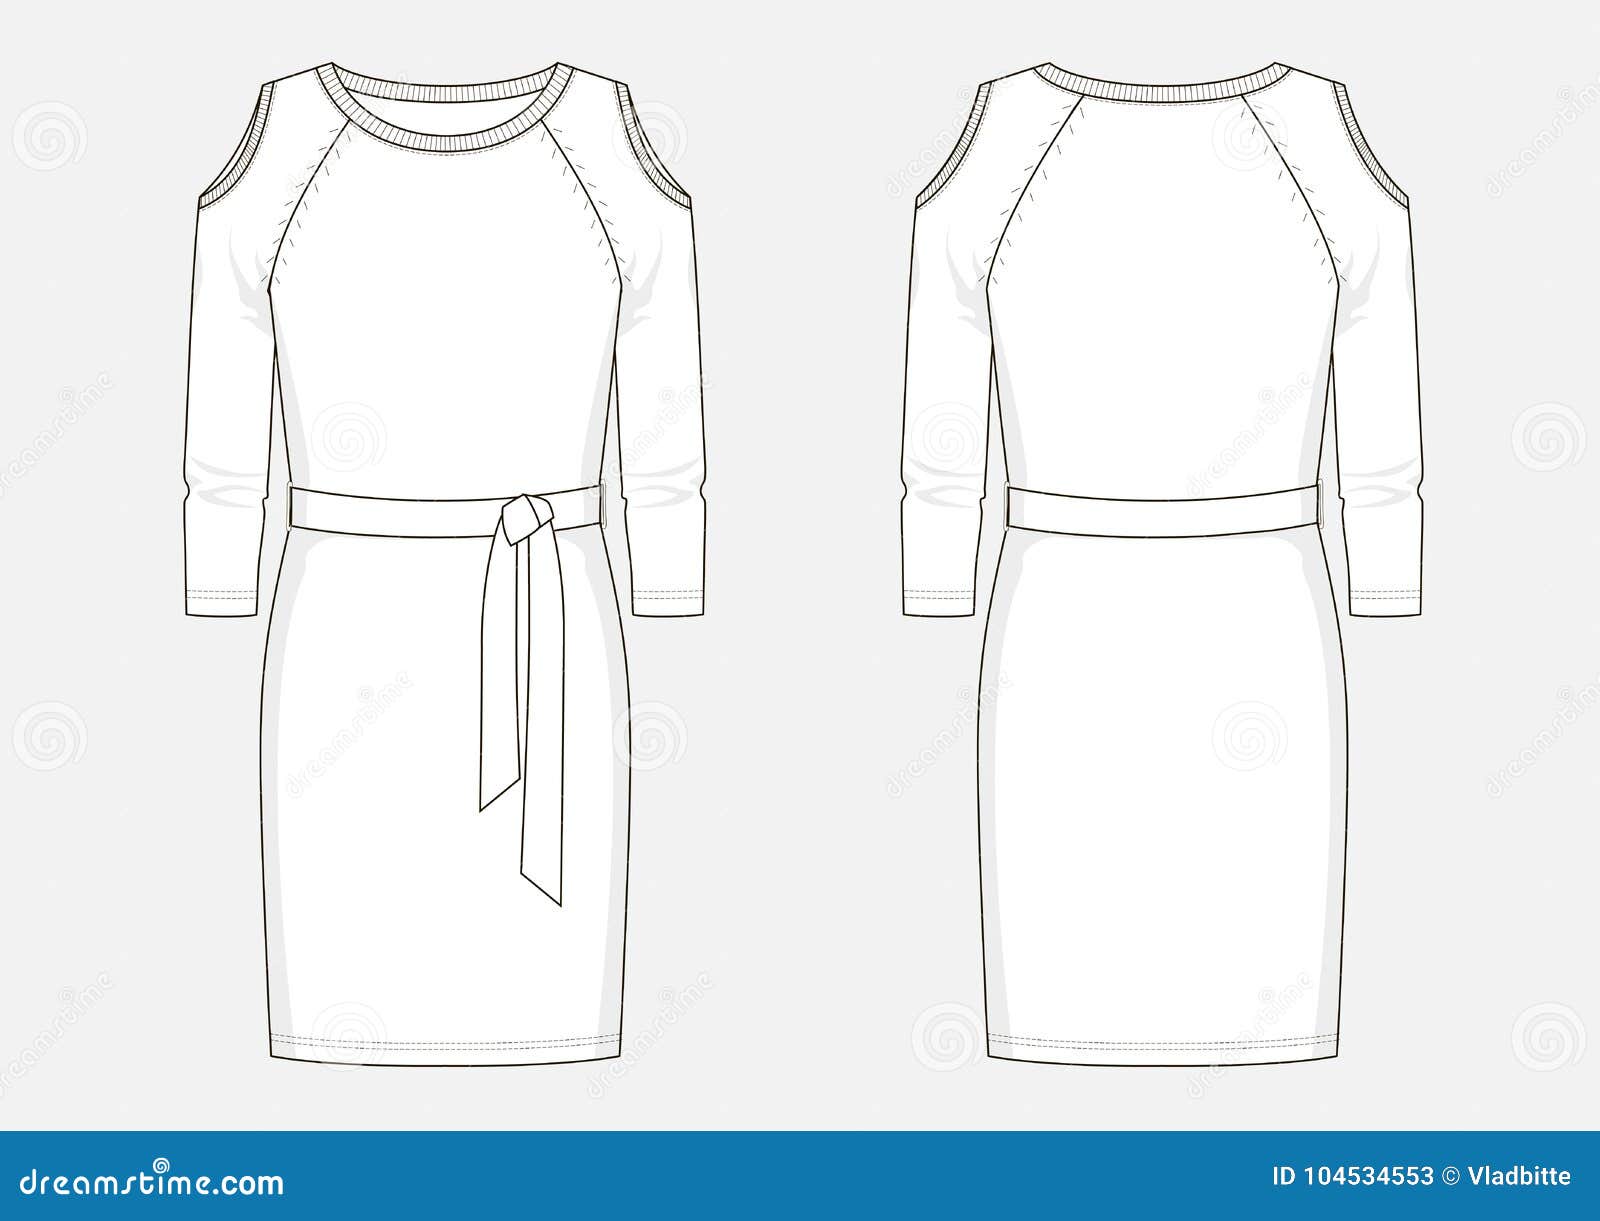 Dress Fashion Flat Sketches Dress Template Stock Vector (Royalty Free)  1657776406 | Shutterstock